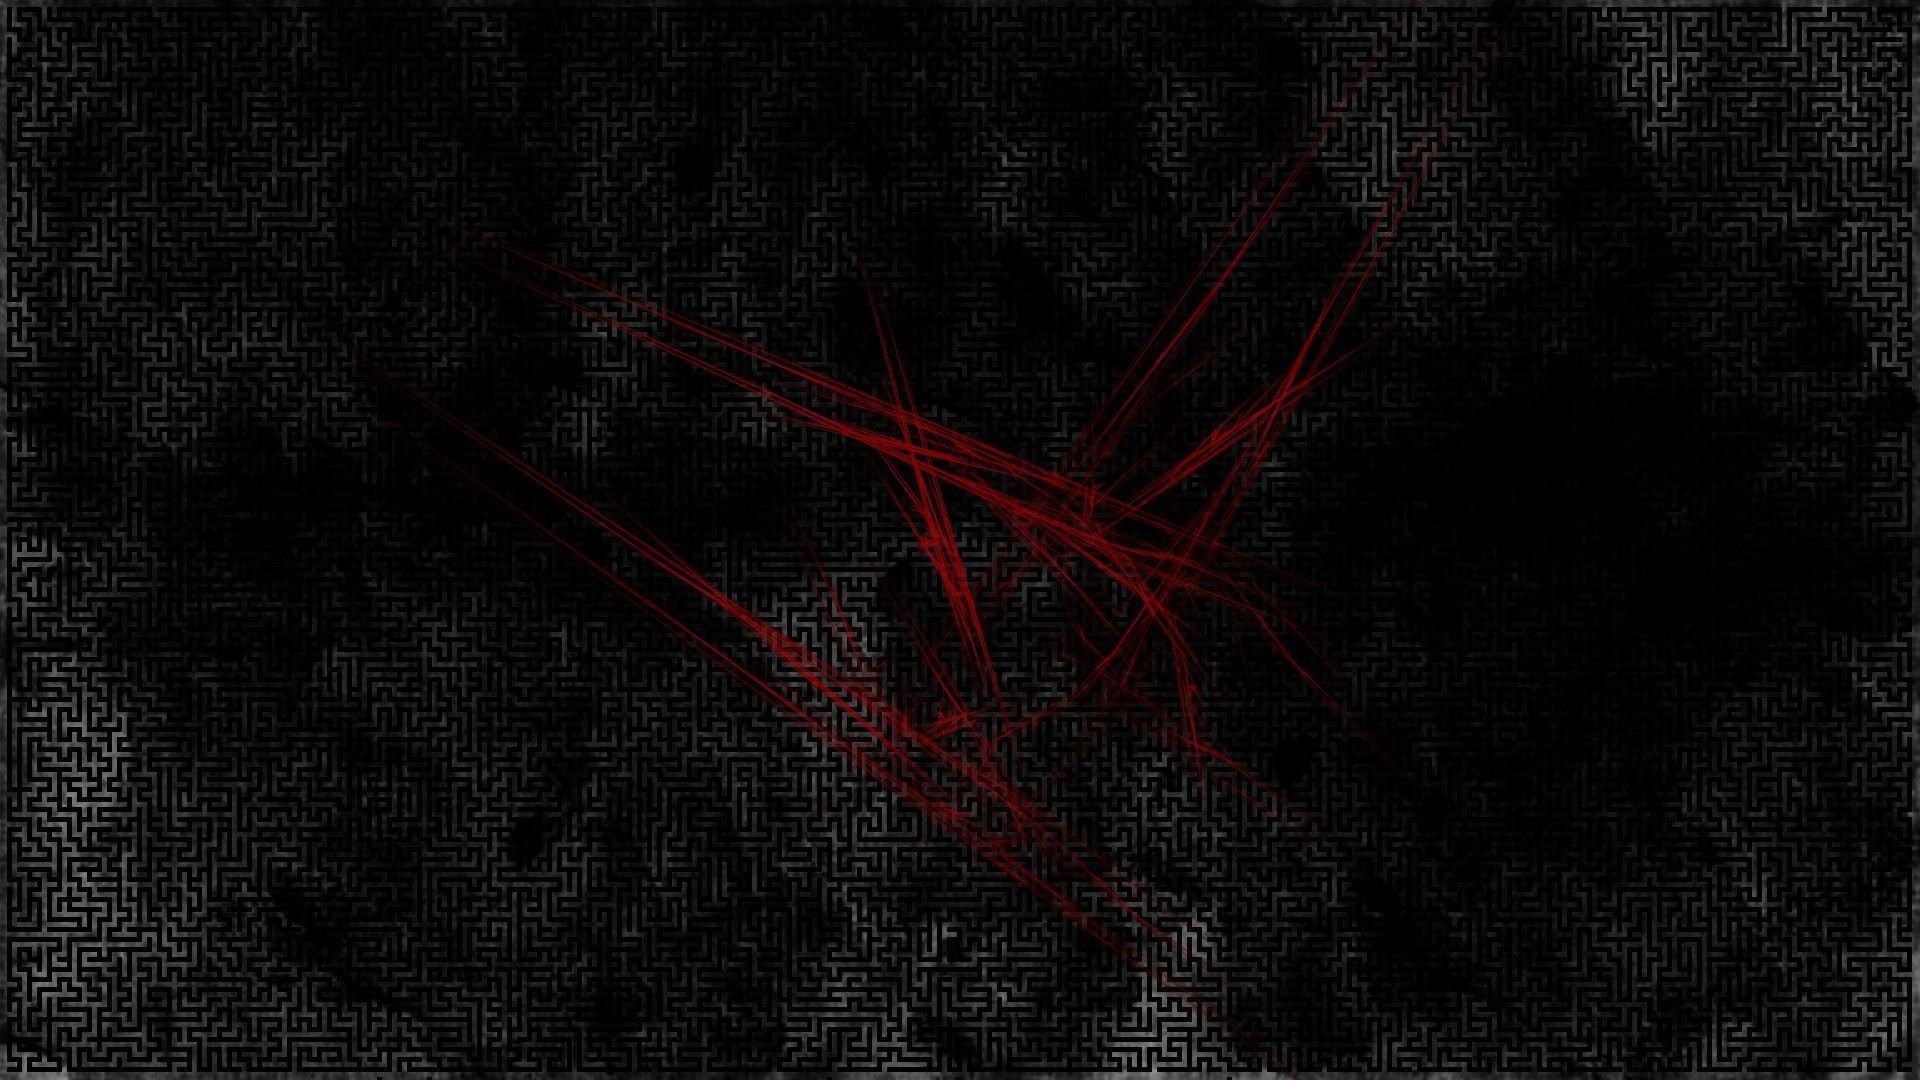 Black And Red Abstract Wallpaper 13 - [1920x1080]